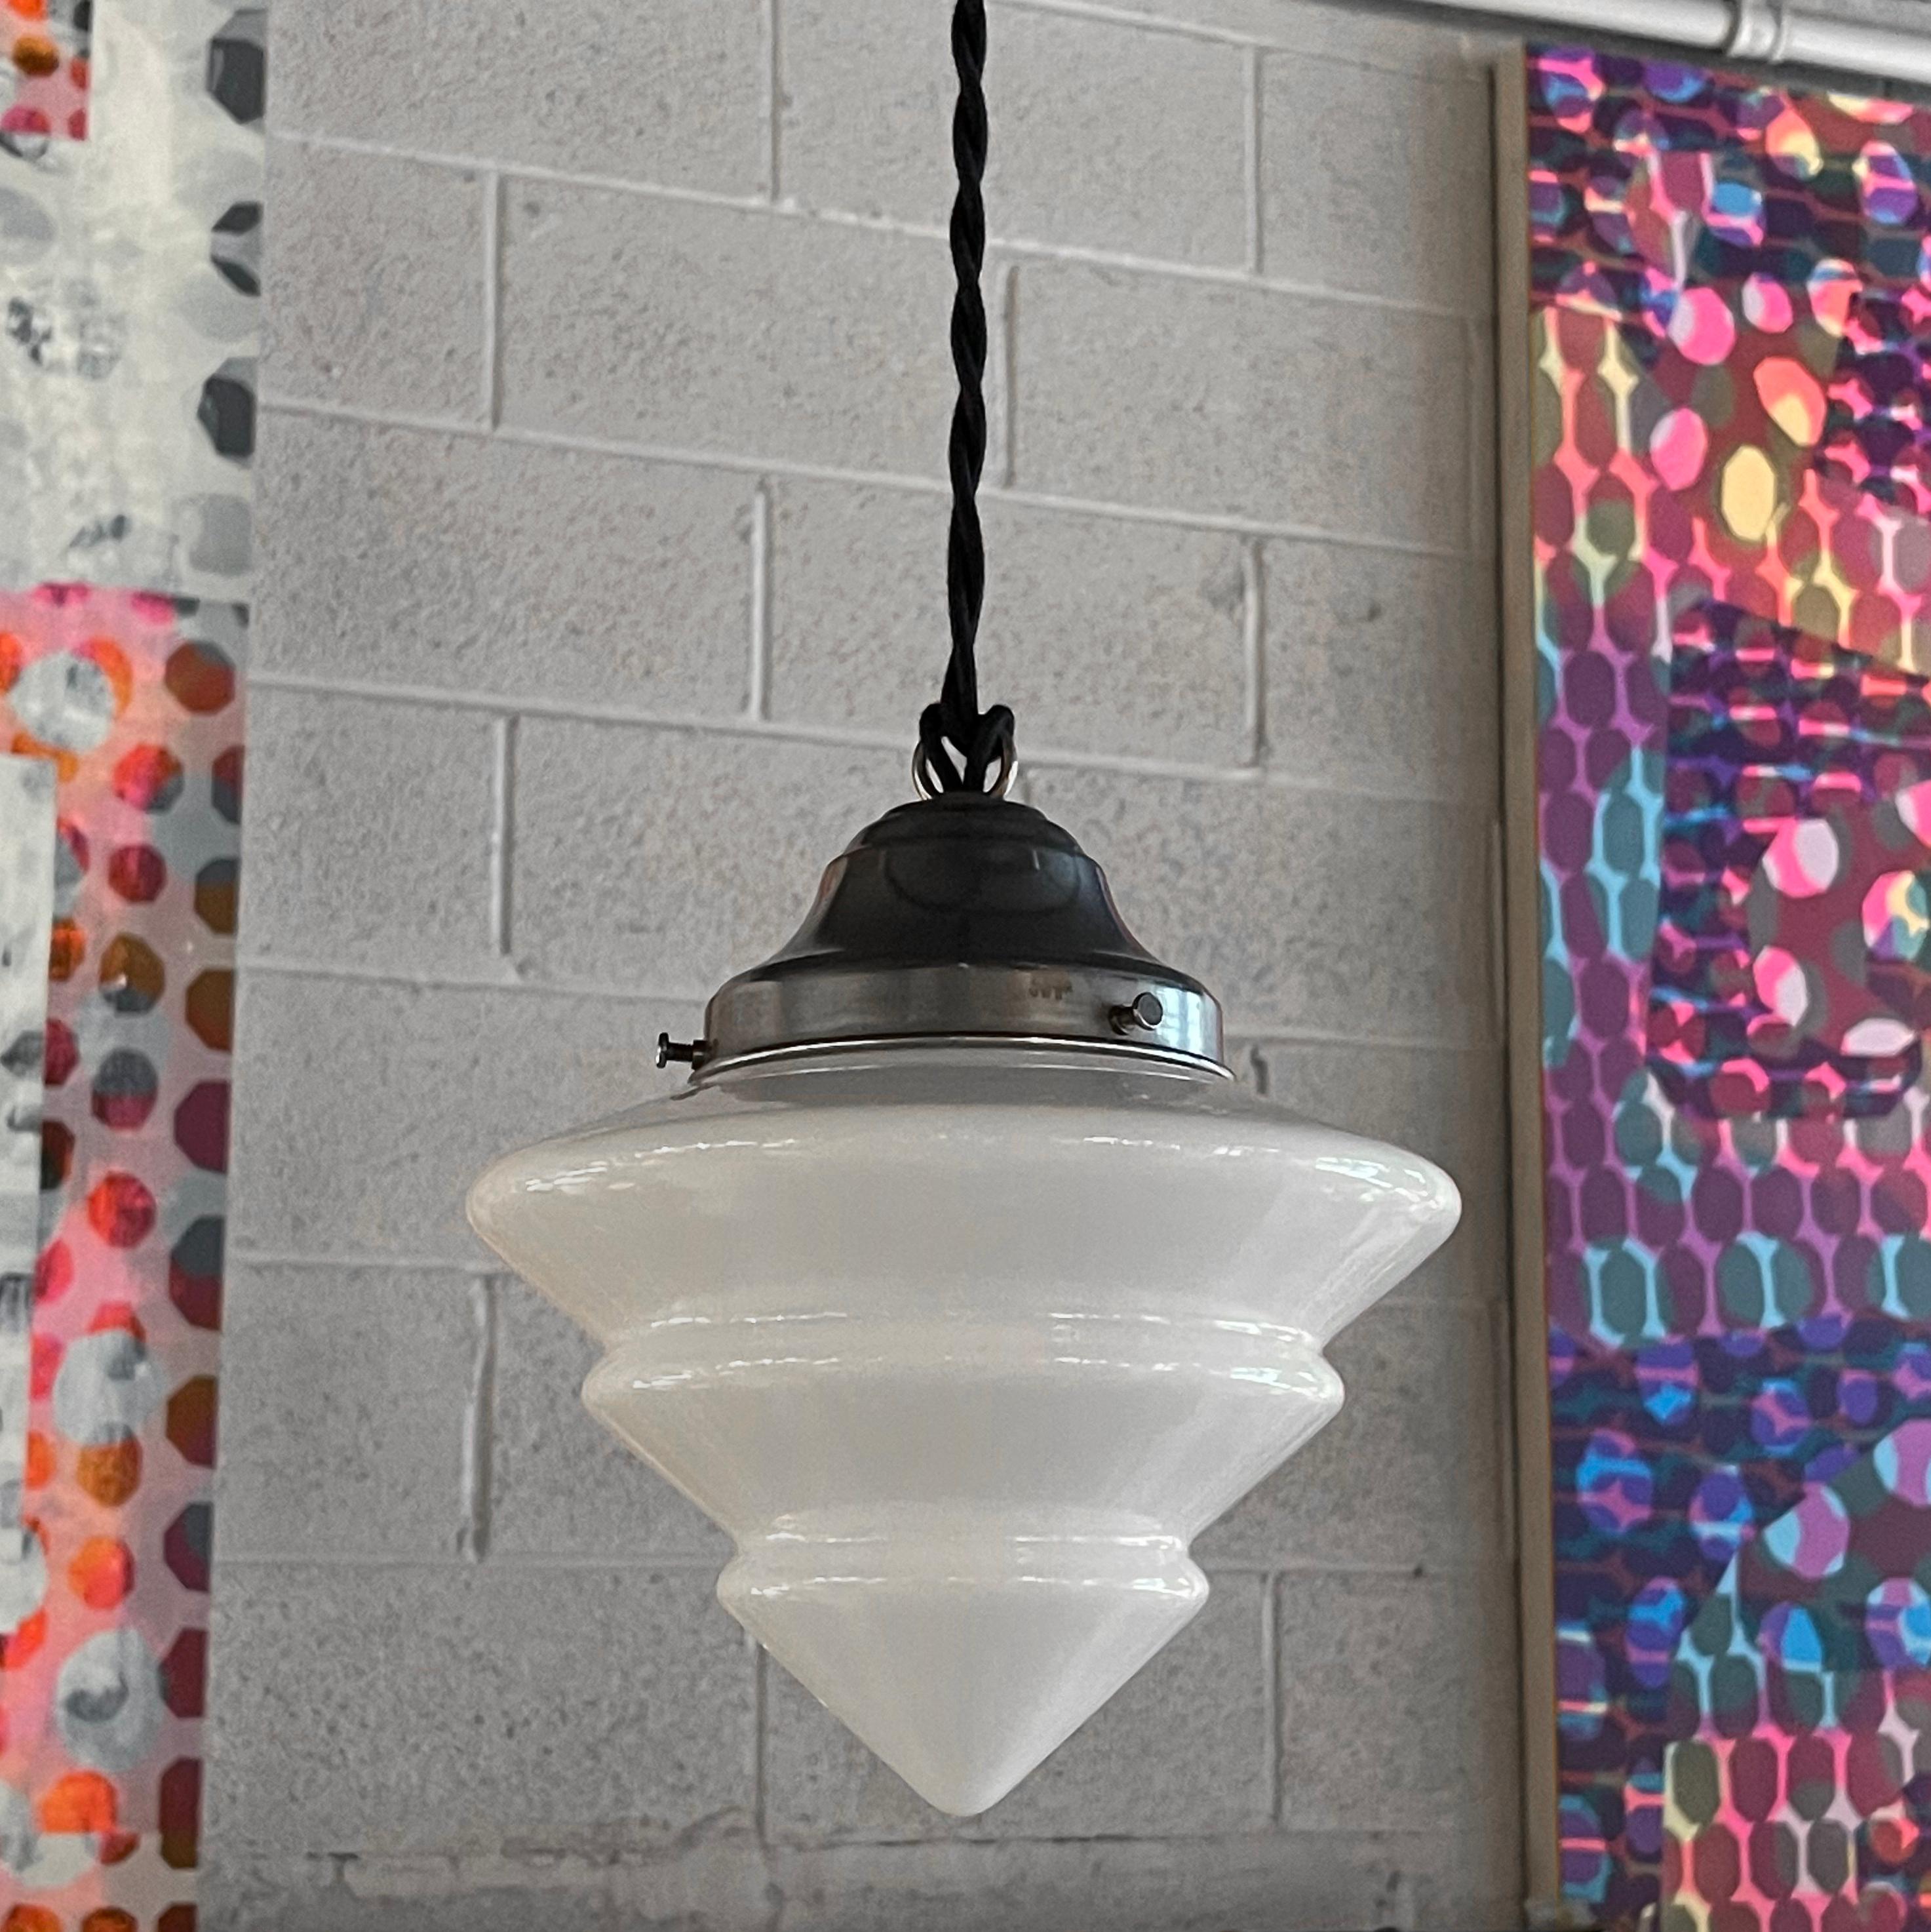 Art Deco pendant light with tiered milk glass cone shade and aluminum fitter is newly wired with 40 inches of braided black cloth cord.